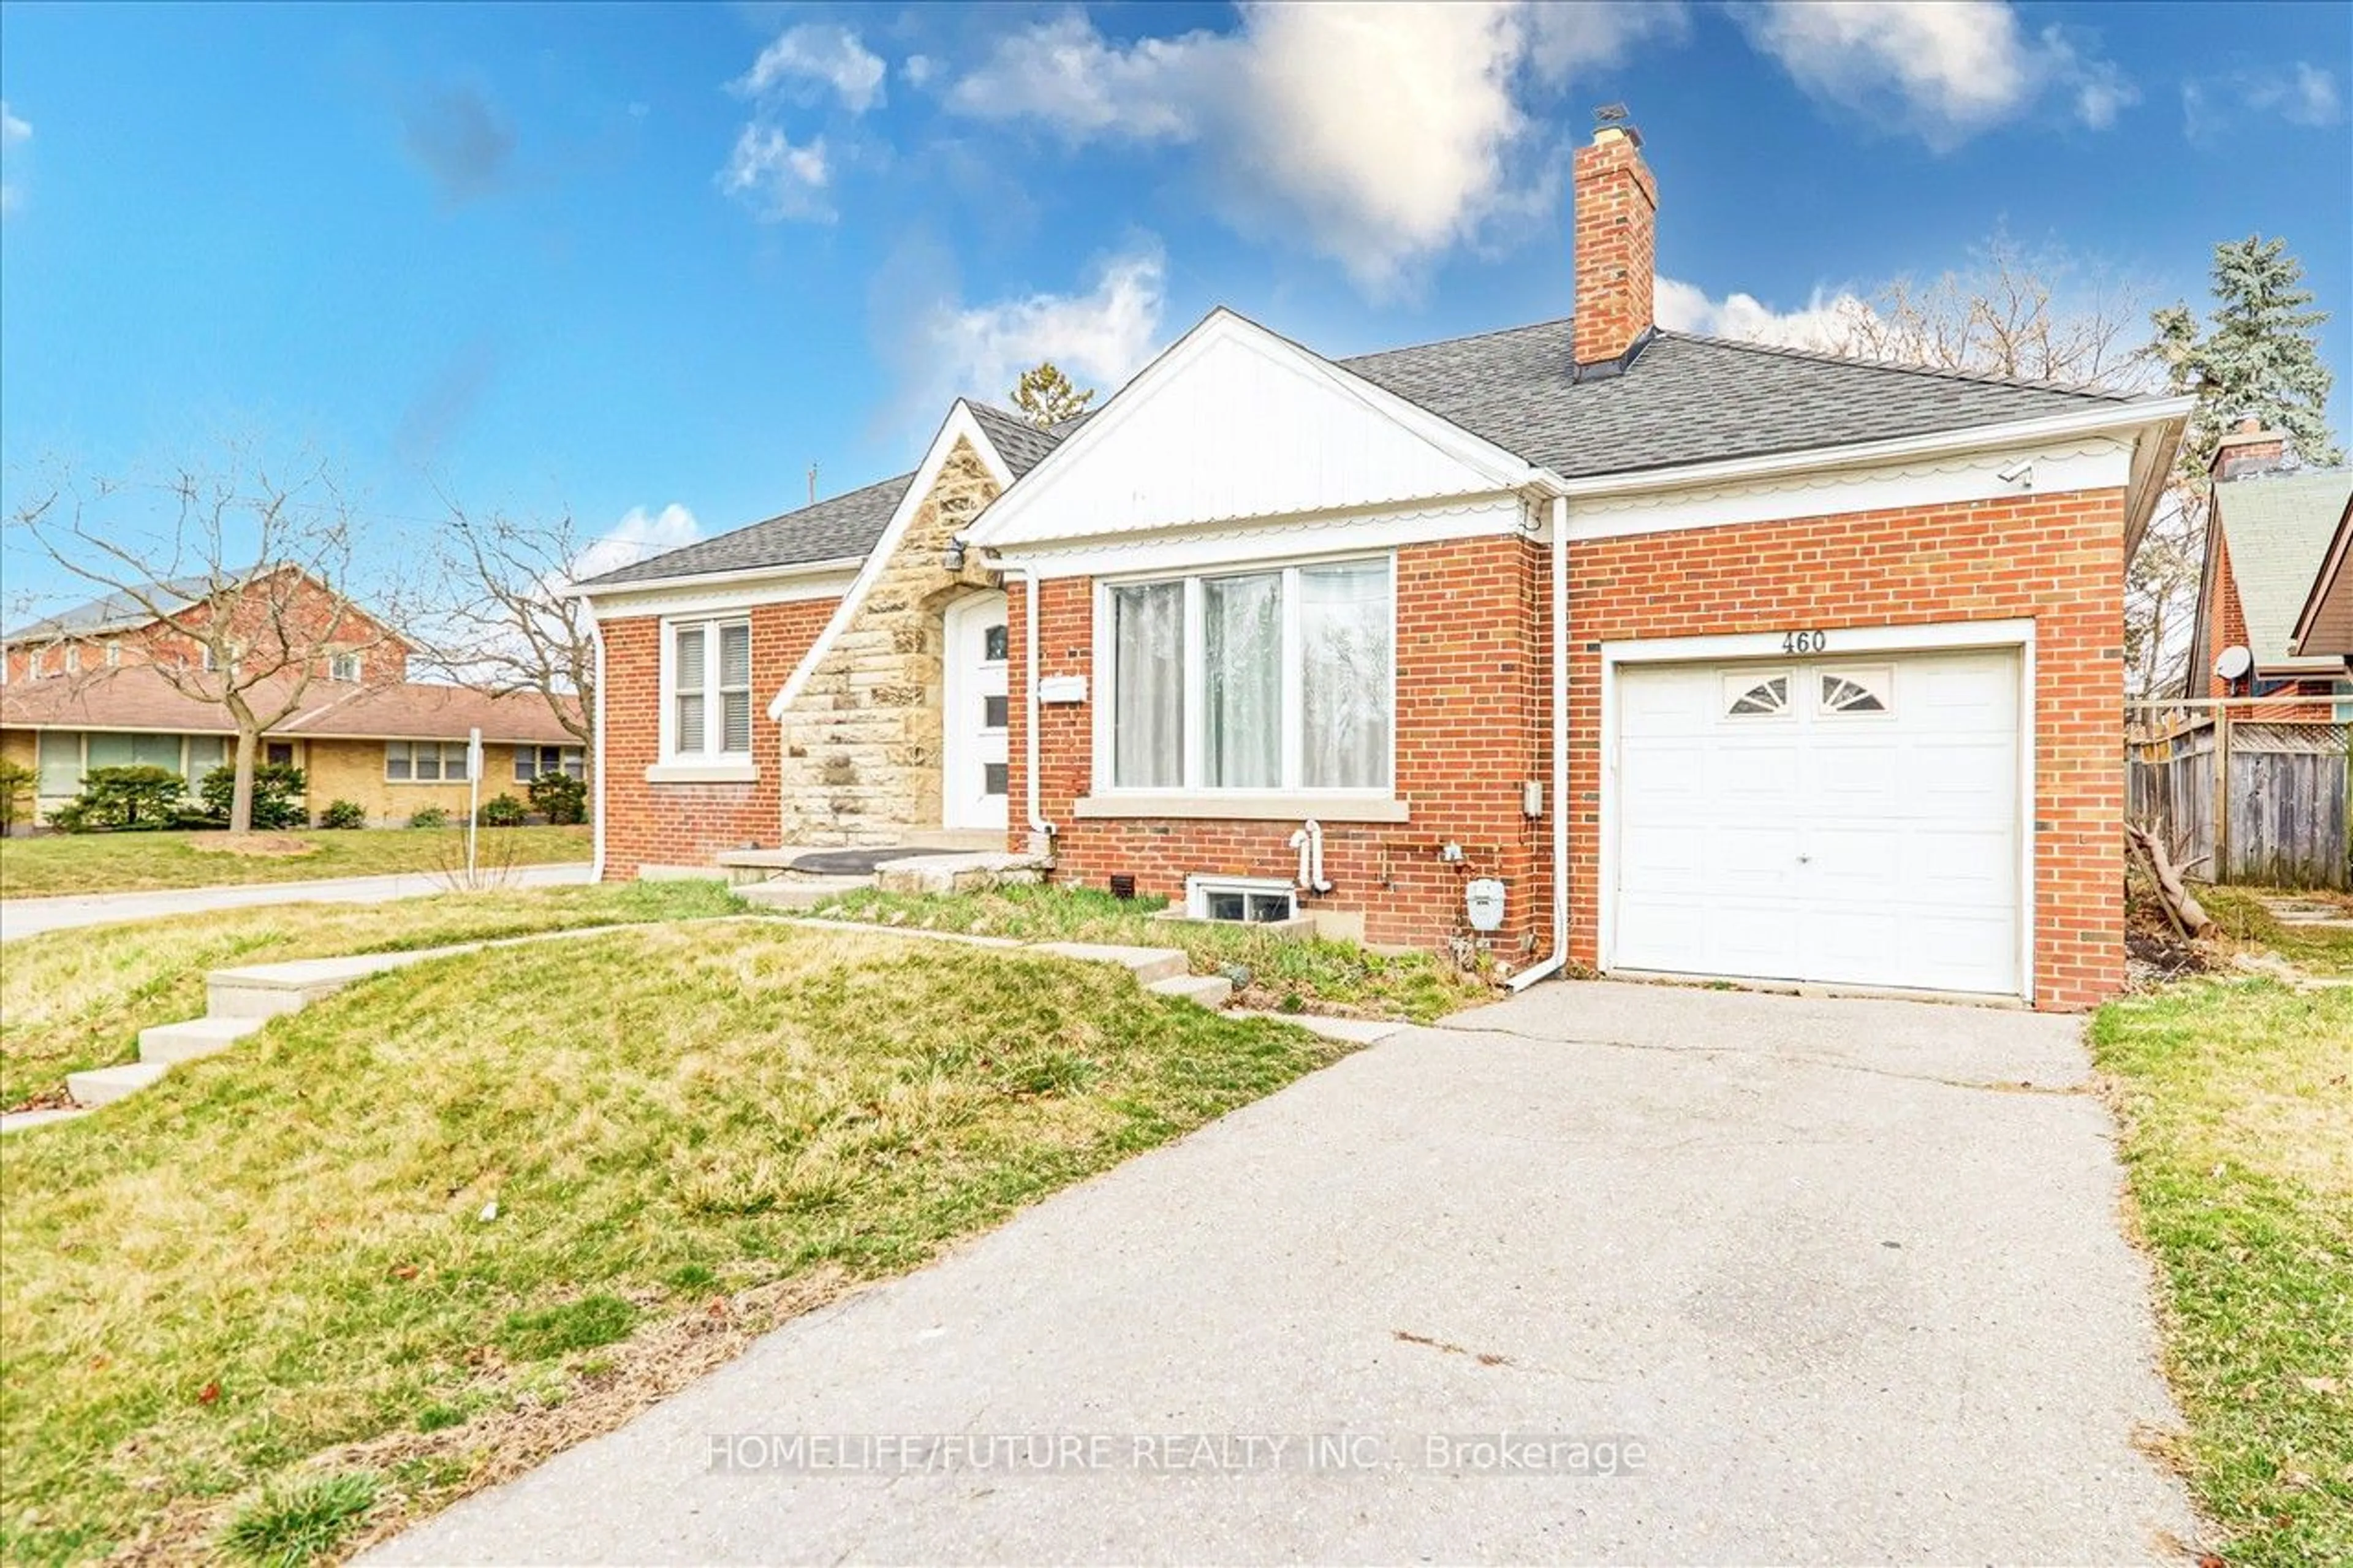 Home with brick exterior material for 460 King St, Oshawa Ontario L1H 1E8